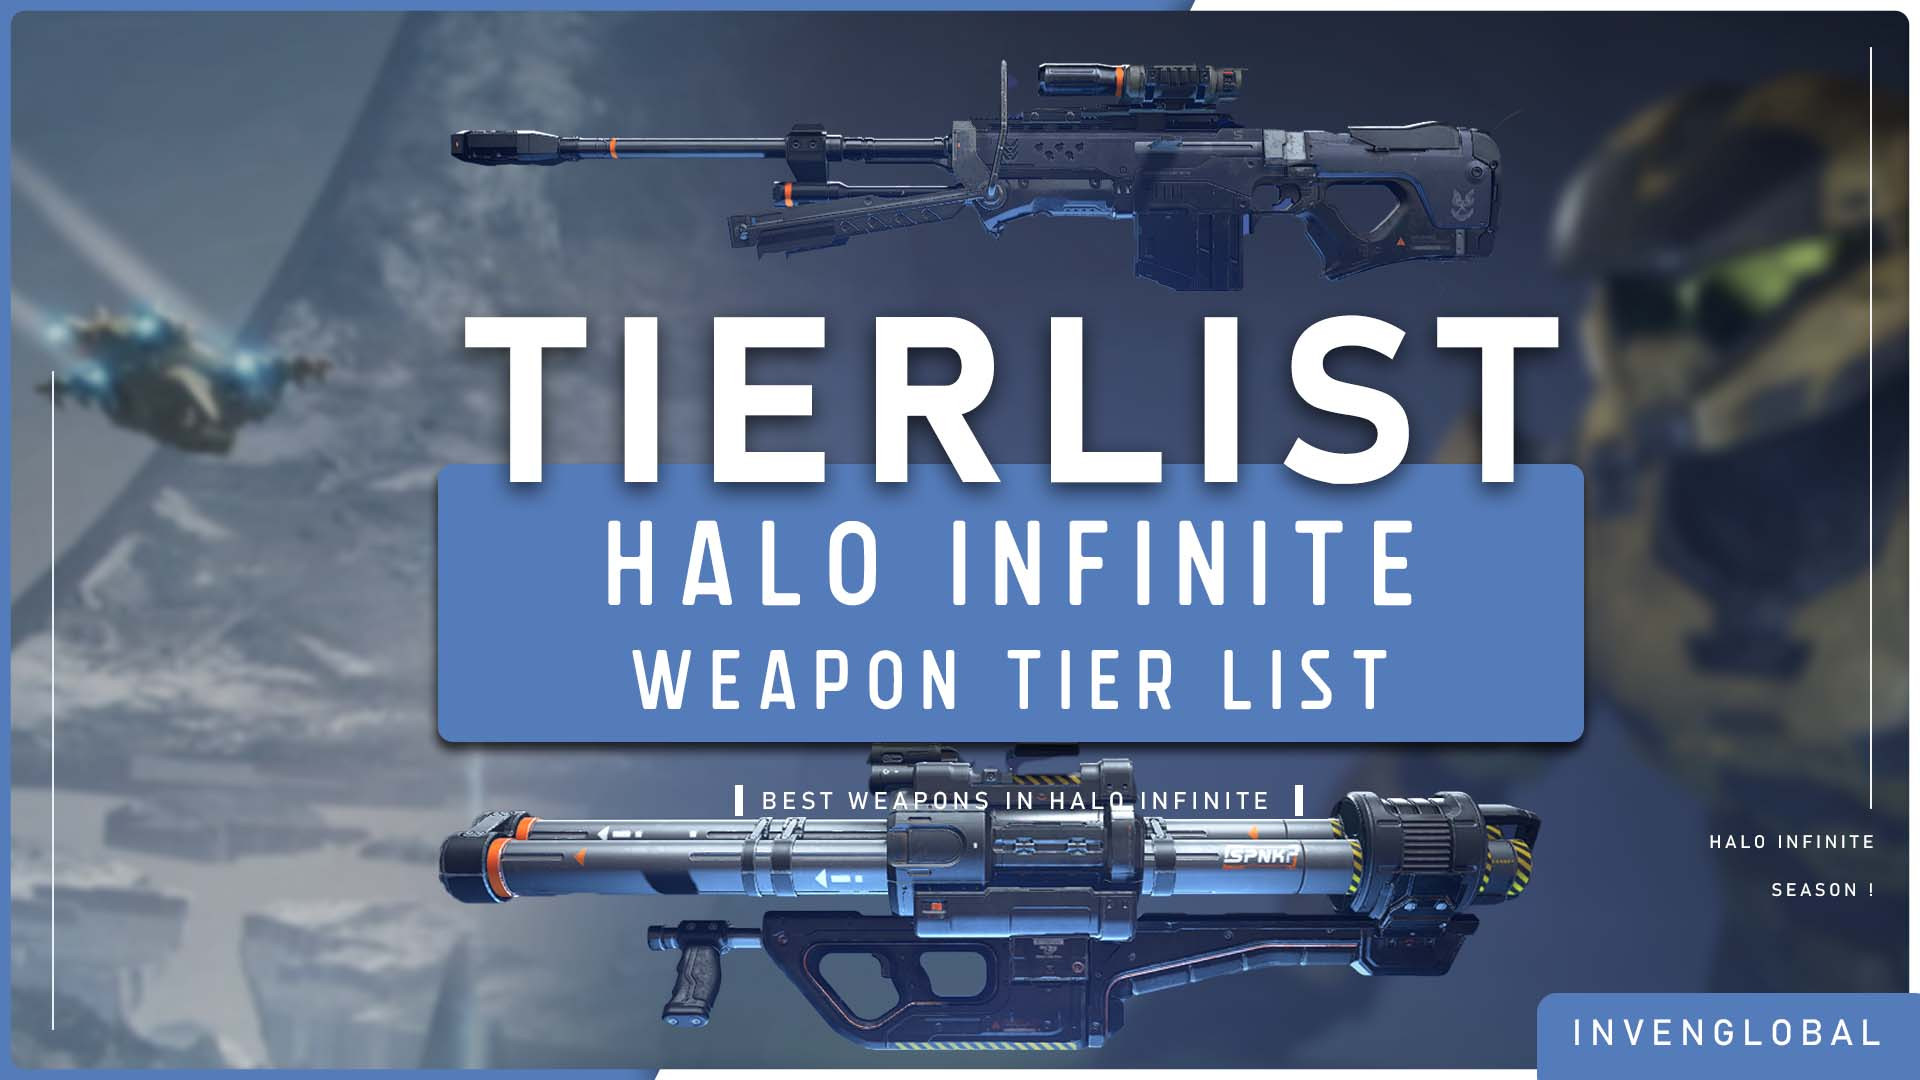 Top Halo Infinite Guns and Weapons for Multiplayer - Tier Liste